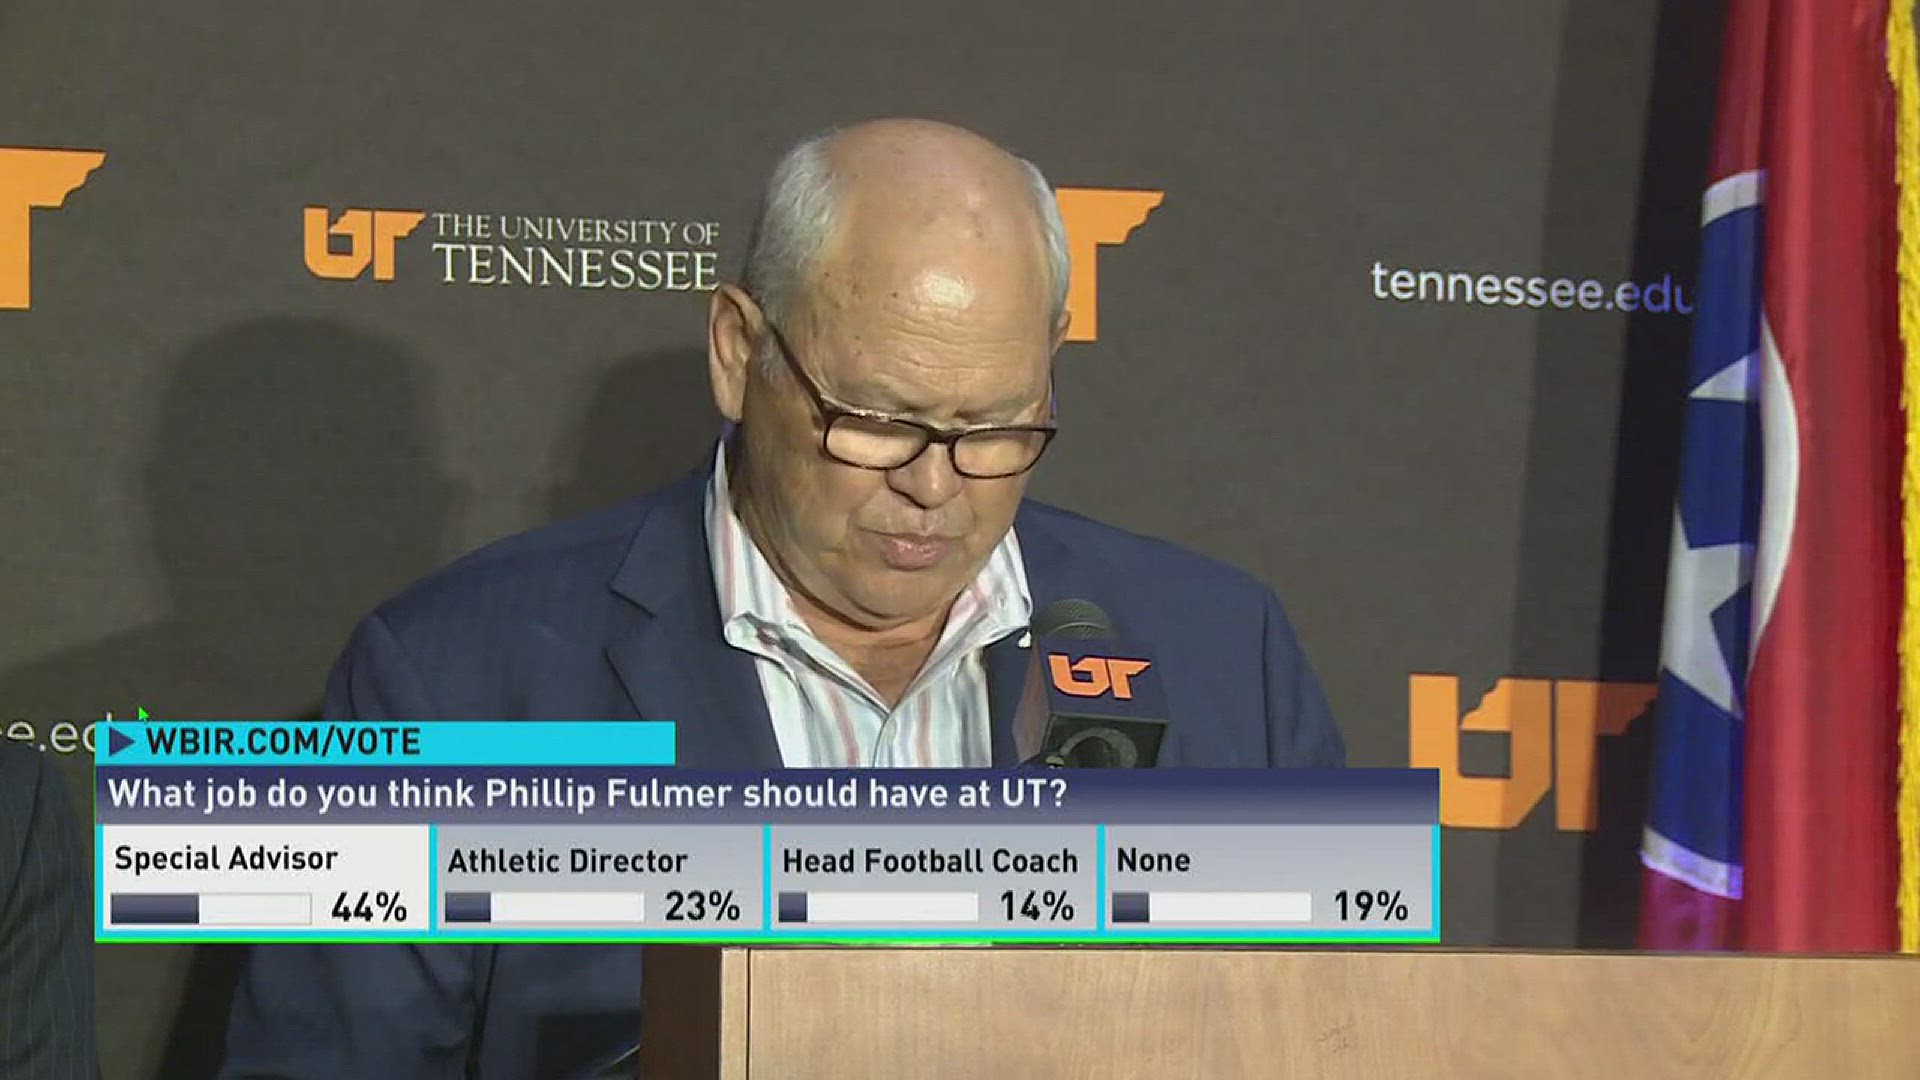 June 20, 2017: Former Vols head football coach Phillip Fulmer has been named special adviser to the University of Tennessee system president.